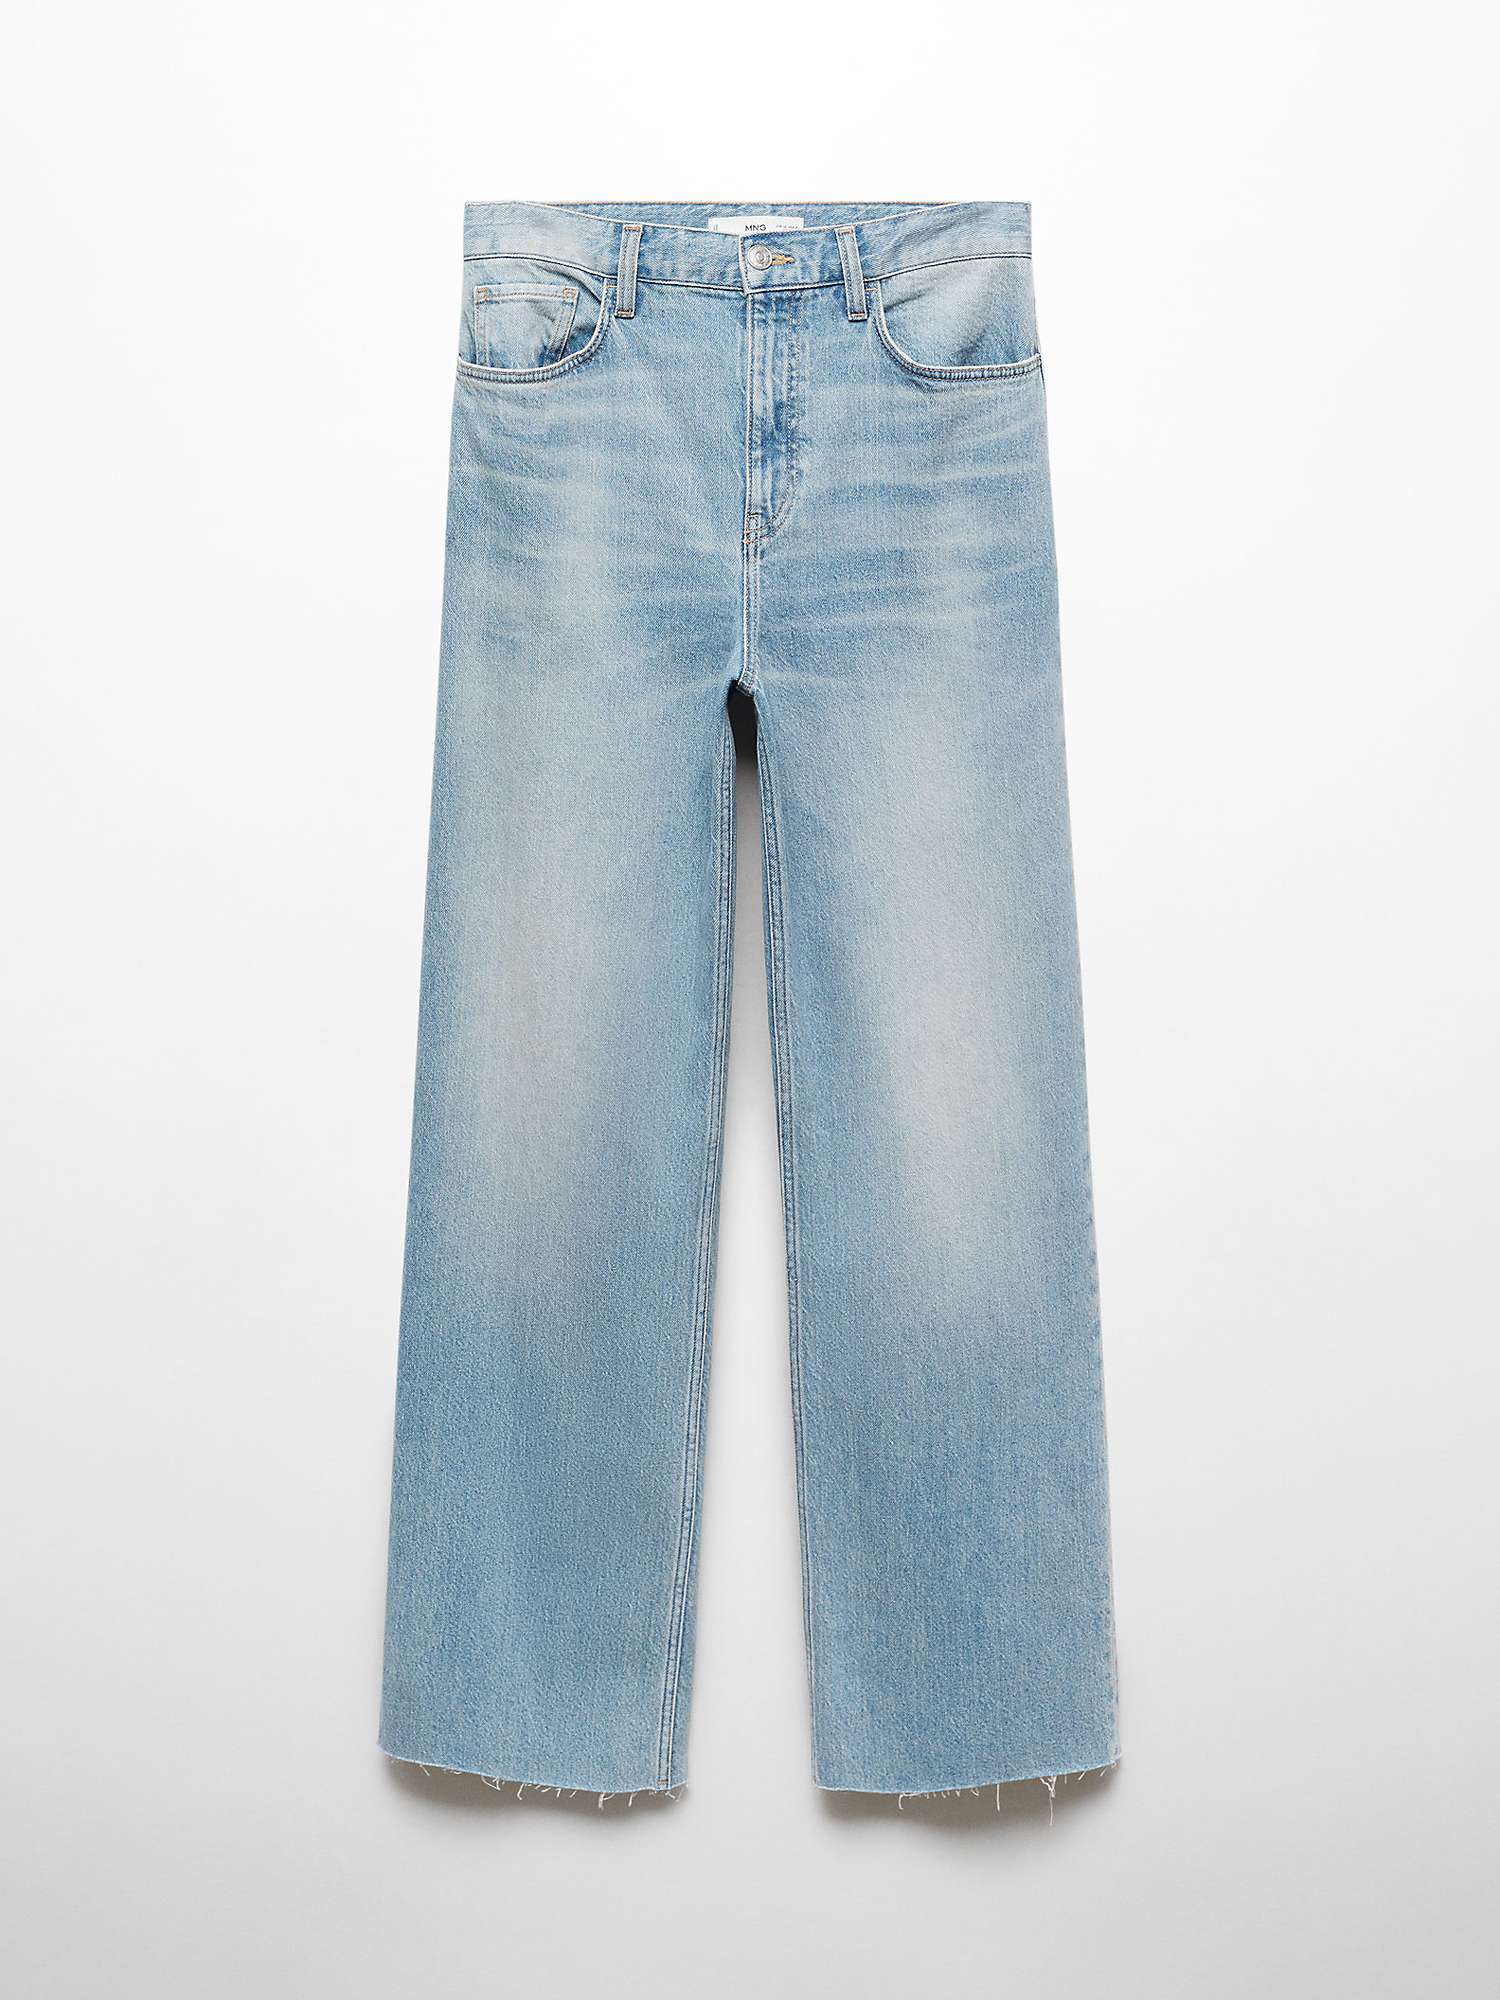 Buy Mango Denis Mid Rise Straight Jeans, Open Blue Online at johnlewis.com